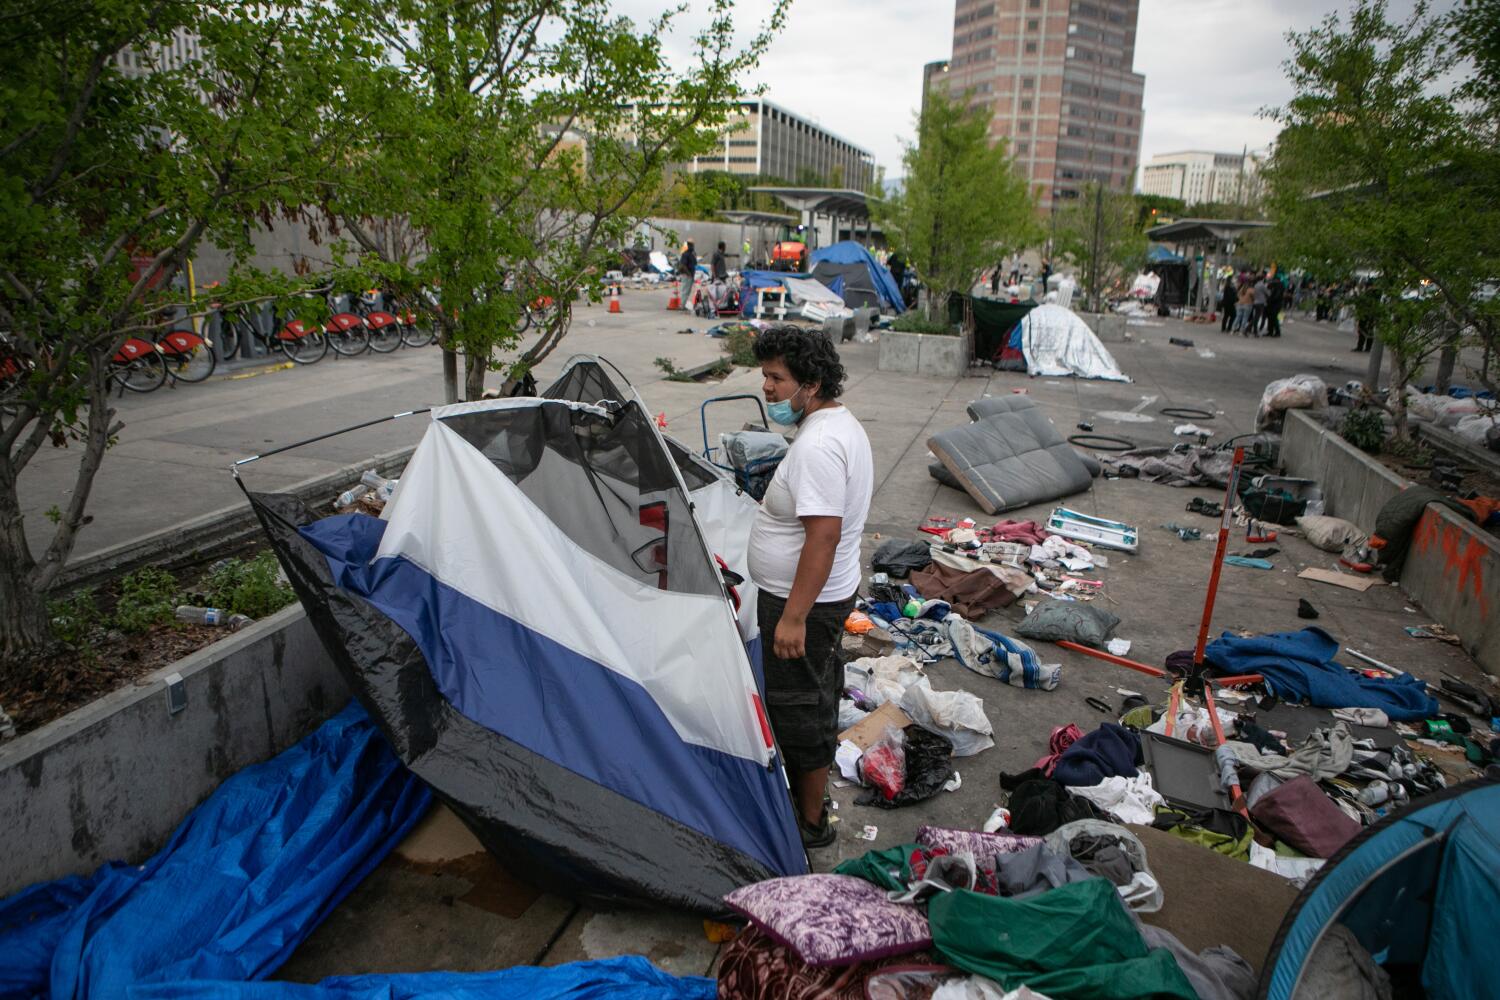 Homeless camp sweeps result in police citations as often as housing offers, survey finds